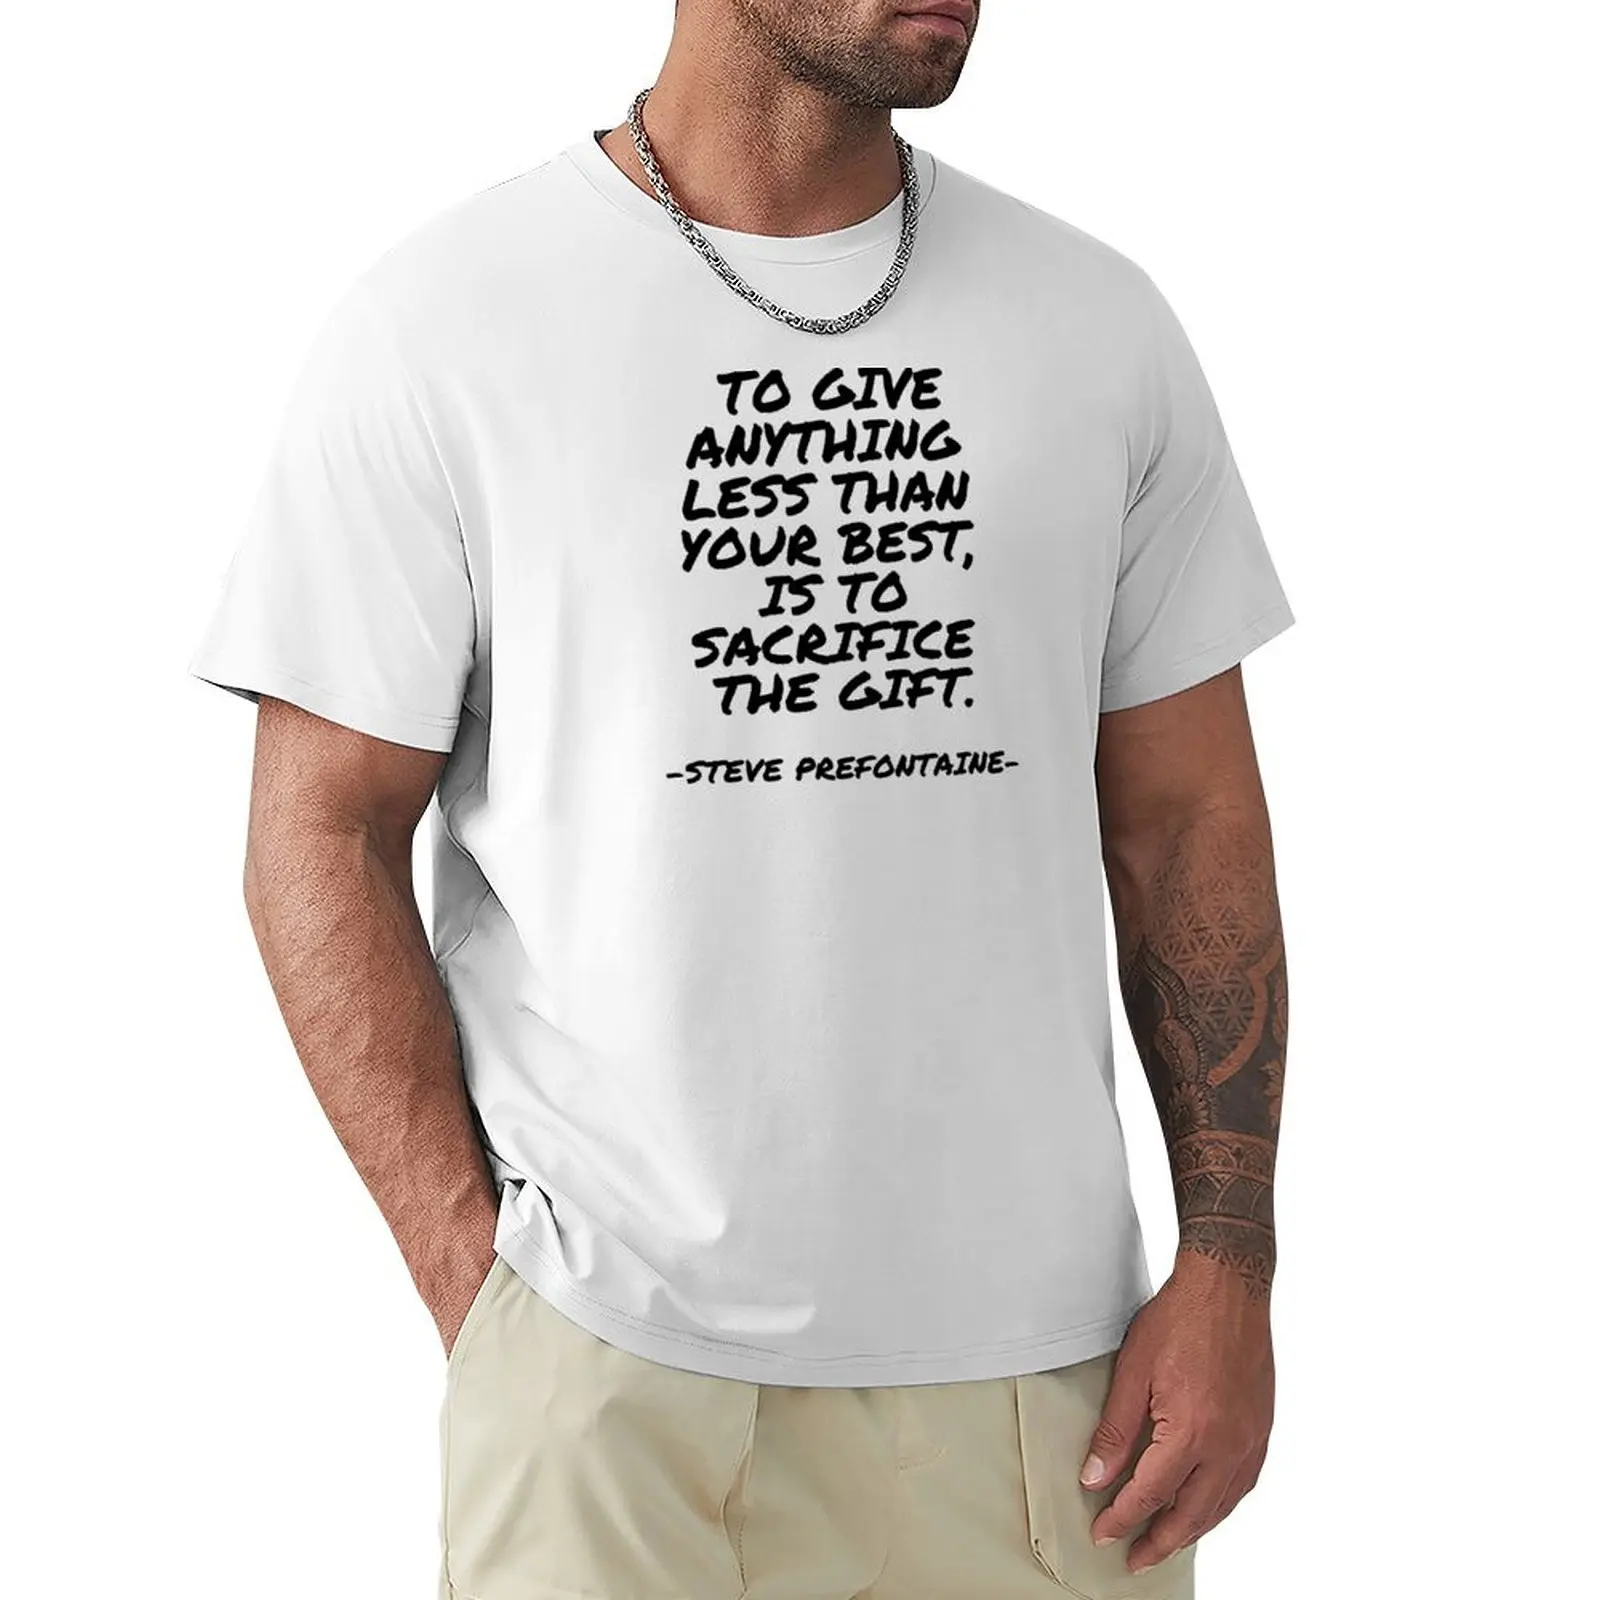 

Steve Prefontaine - To give anything less than your best, is to sacrifice the gift. T-shirt blanks plain white t shirts men